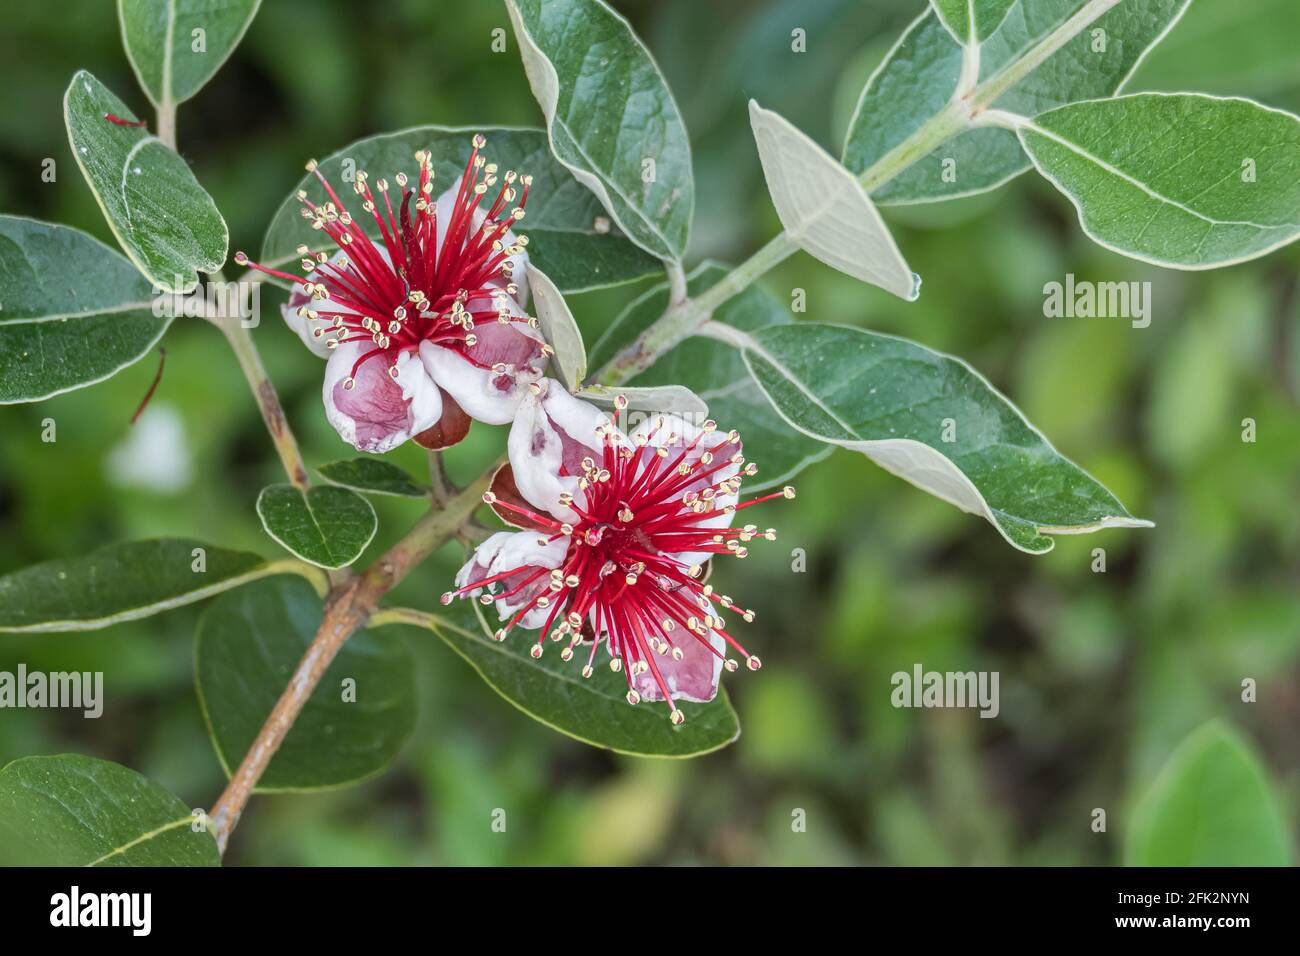 pineapple guava flowers close up view outdoors feijoa plant Stock Photo